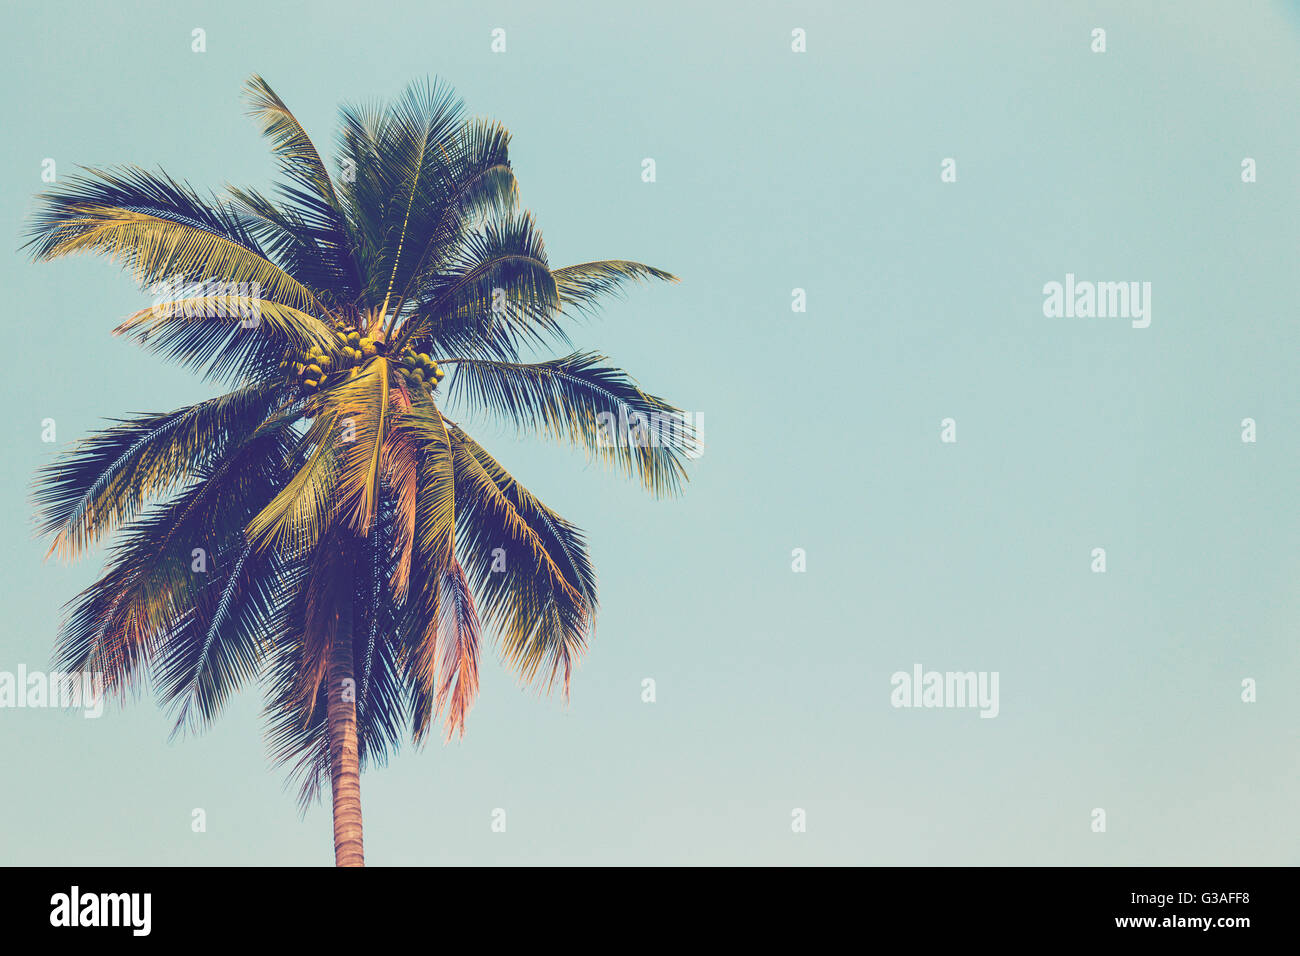 Coconut palm tree and blue sky vintage with space. Stock Photo